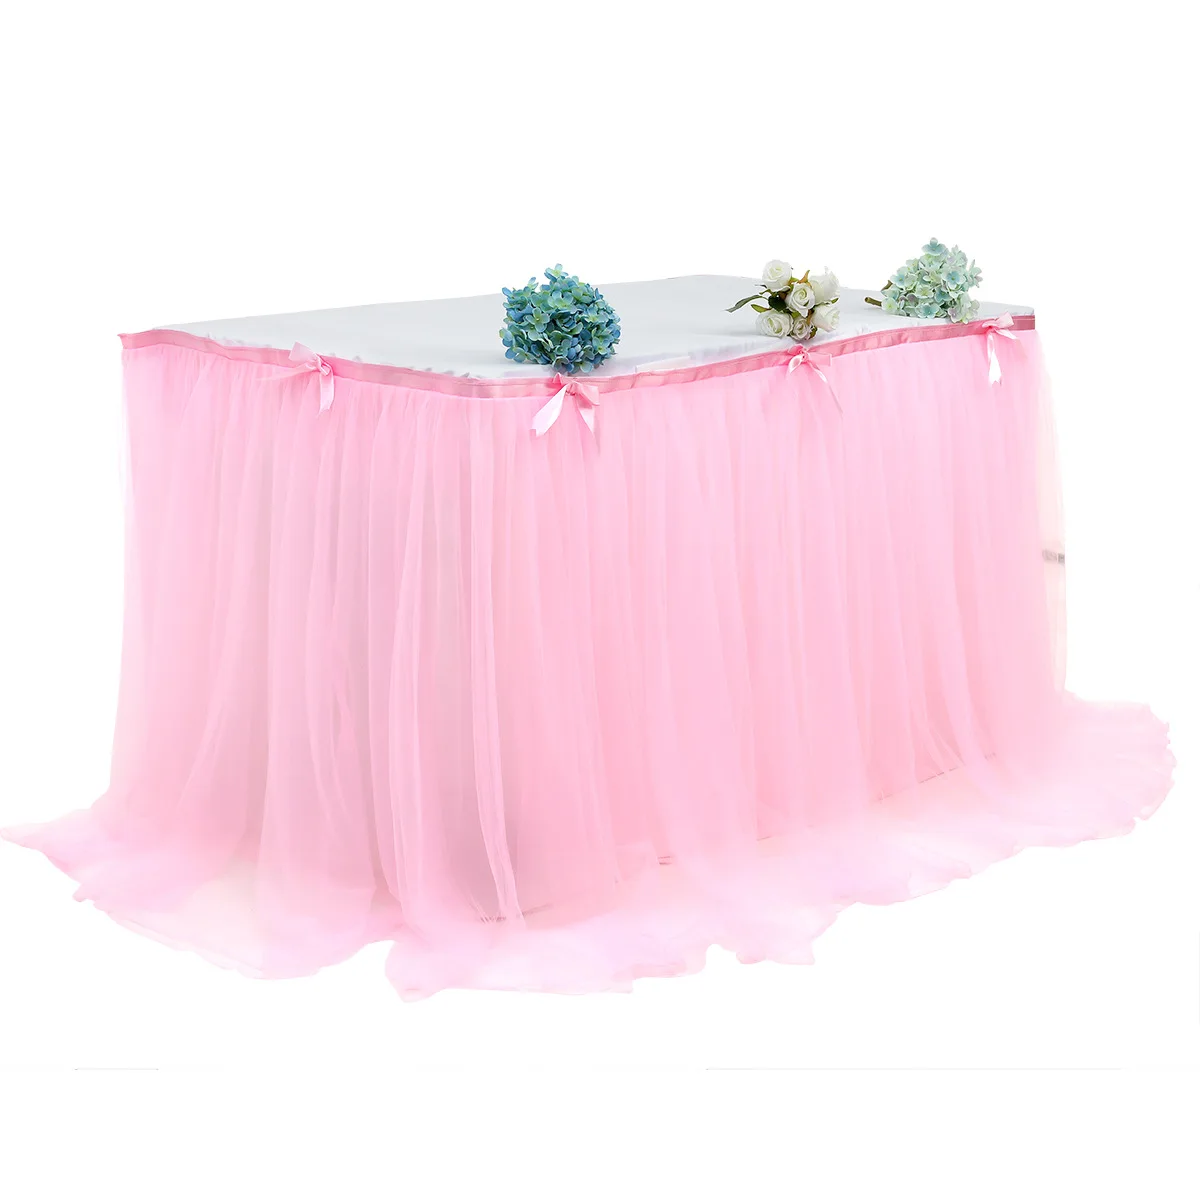 
custom hawaiian Purple pink colorful tulle tutu decoration Chiffon Table Cloth Cover Skirt Skirts for party wedding banquet 